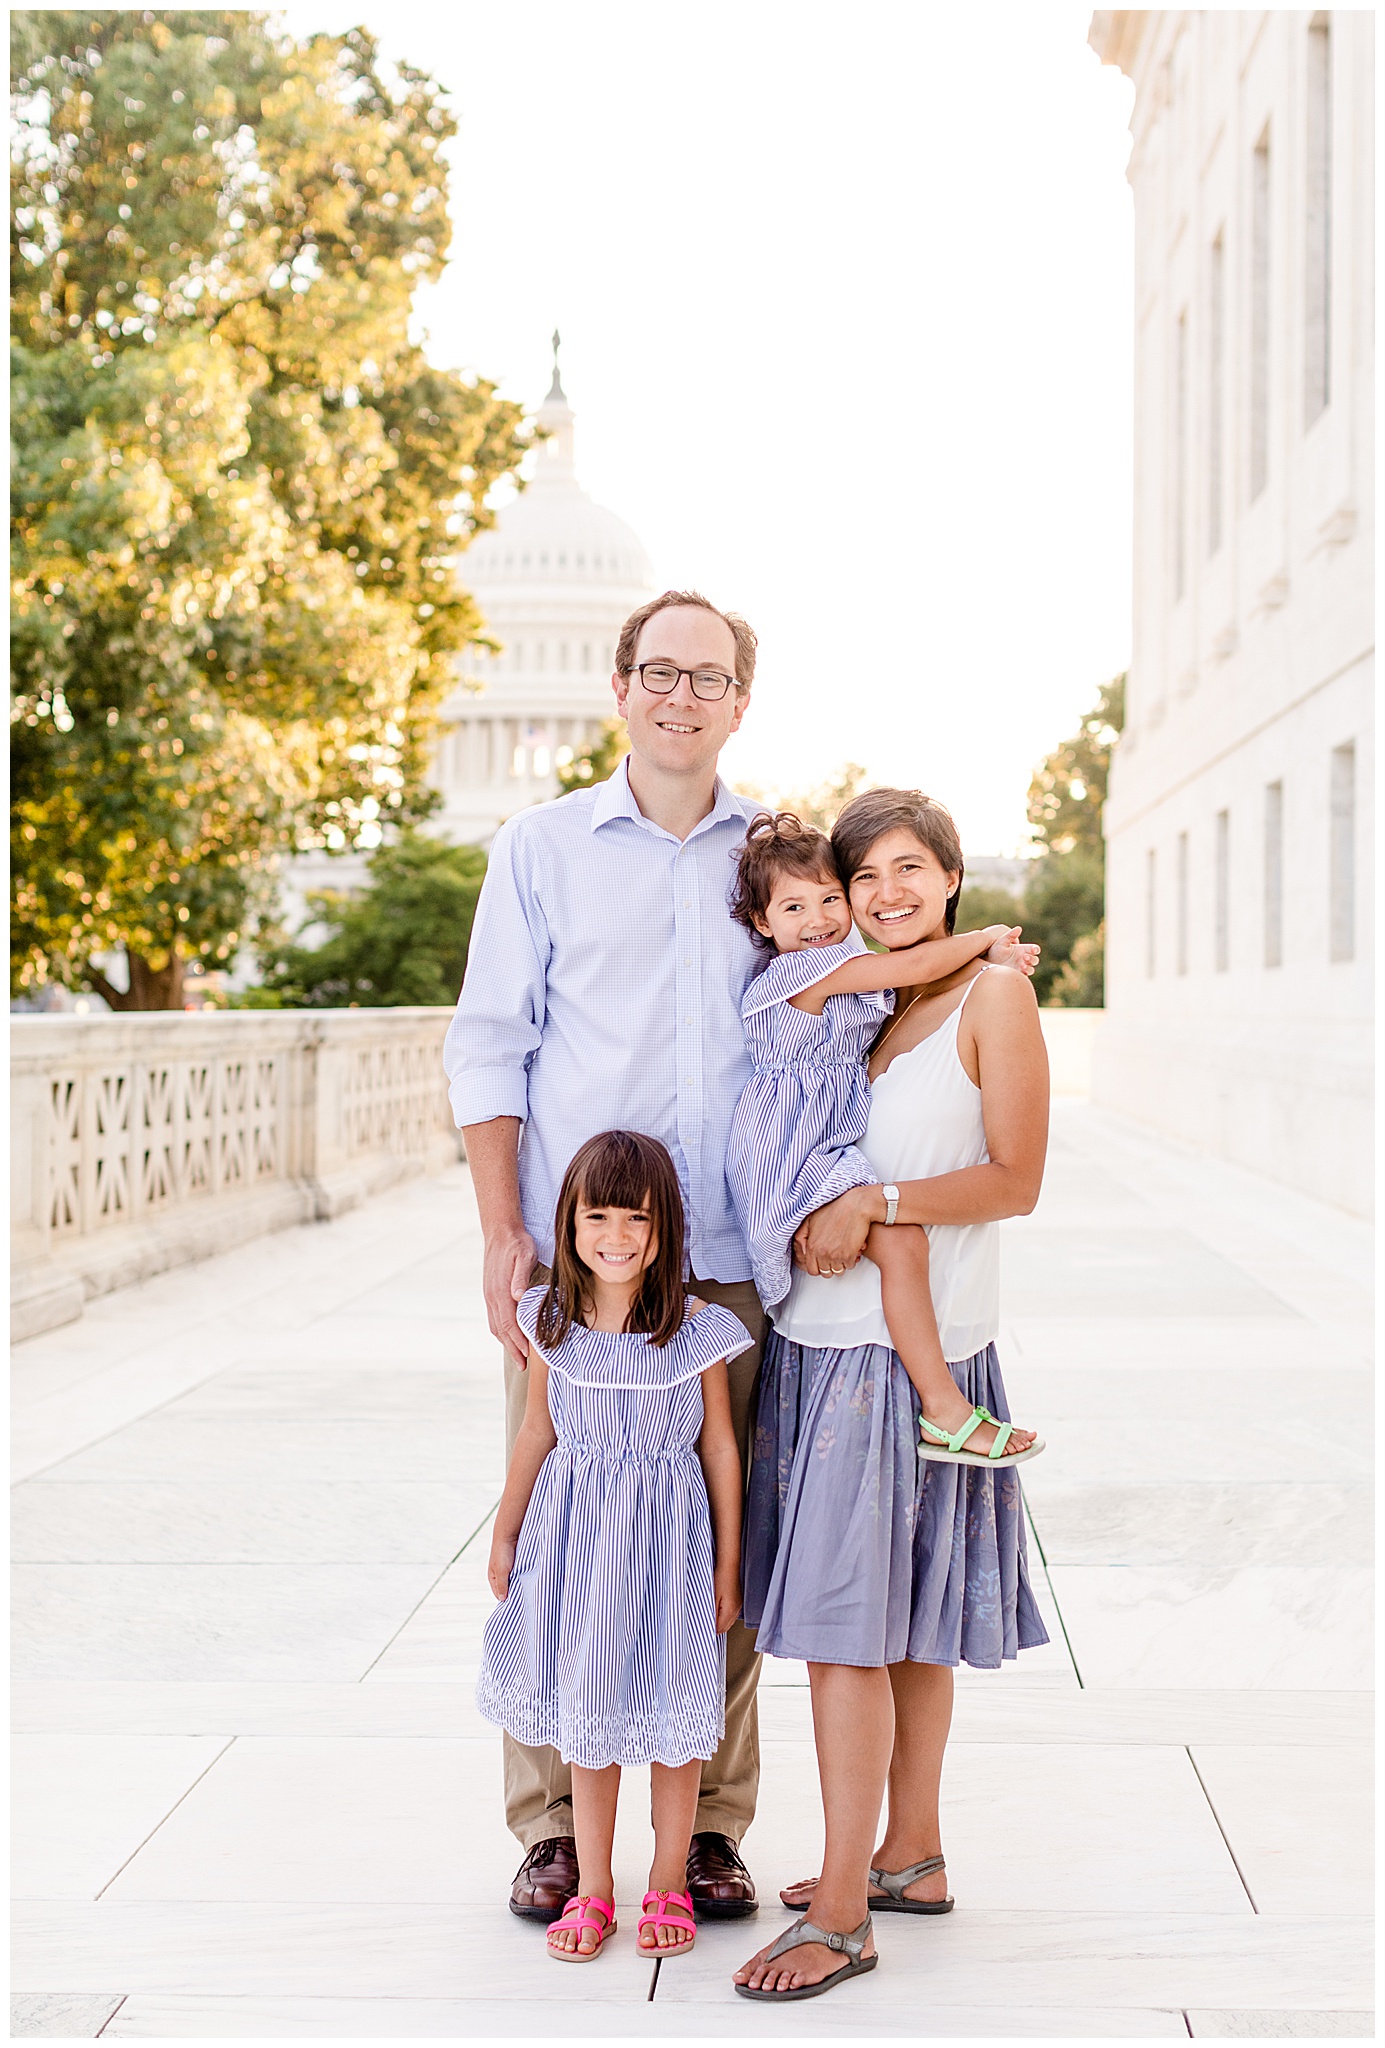 Family Portraits at the Capitol in Washington, DC by Bethany M Brasfield Kofmehl